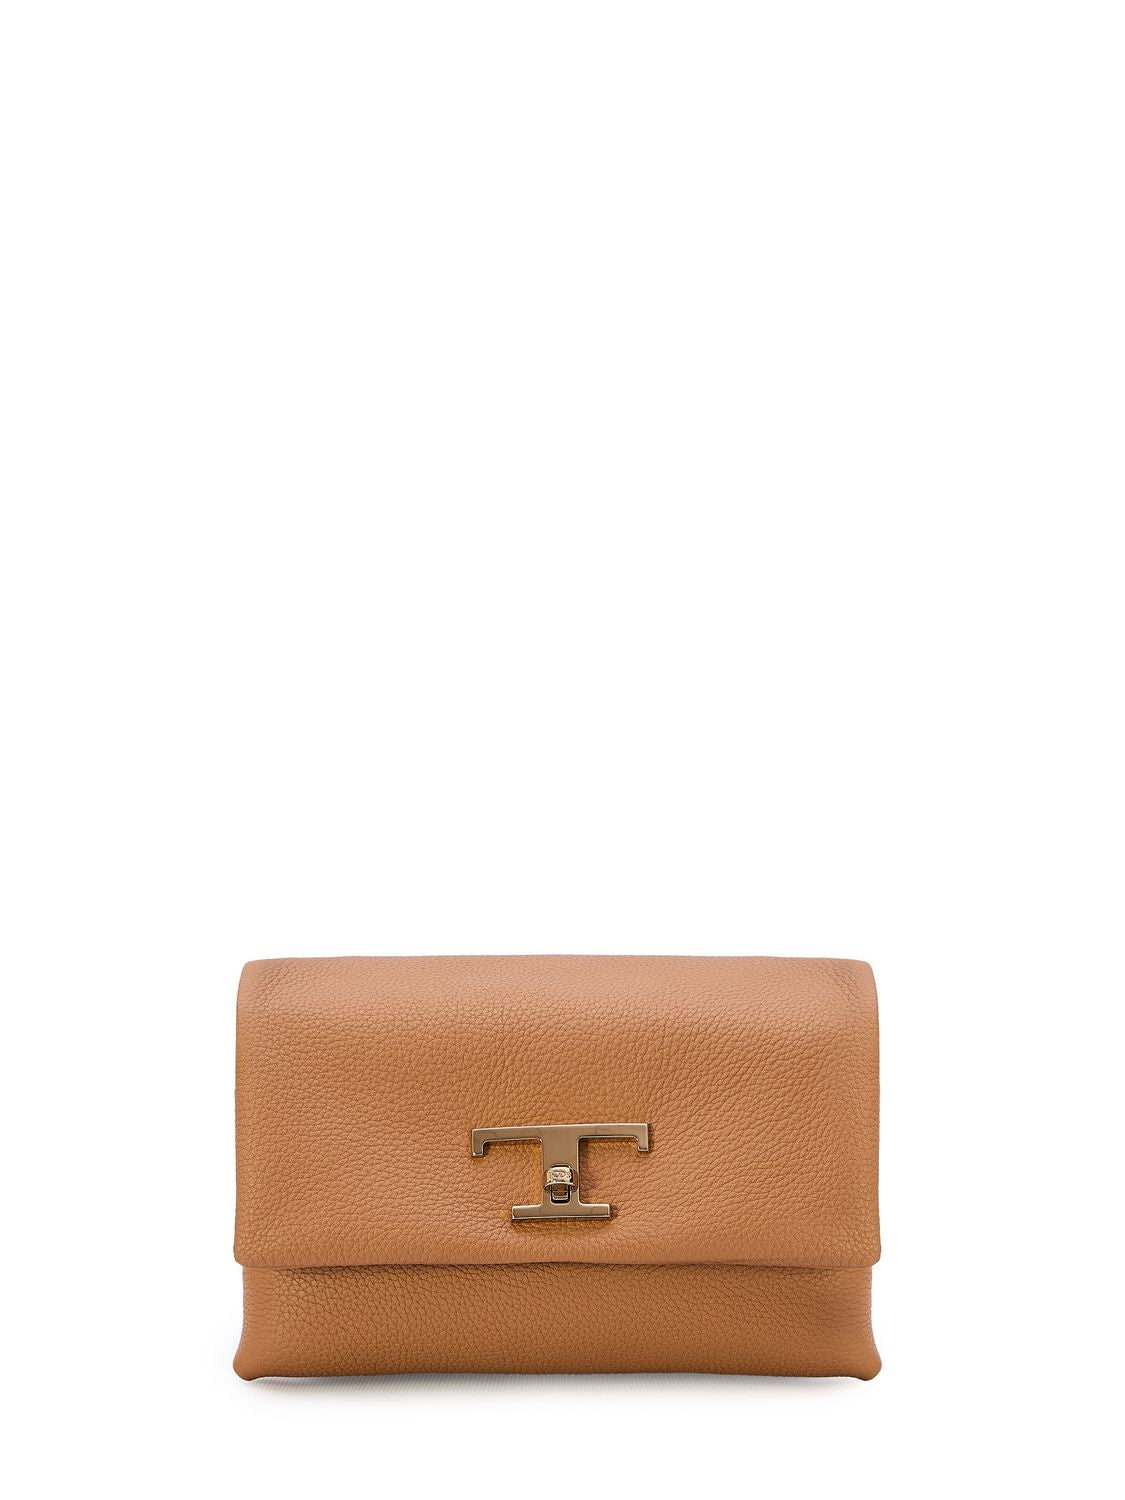 TOD'S Timeless Mini Brown Grained Leather Handbag with Detachable Straps and Suede Lining, 24x14x11 cm